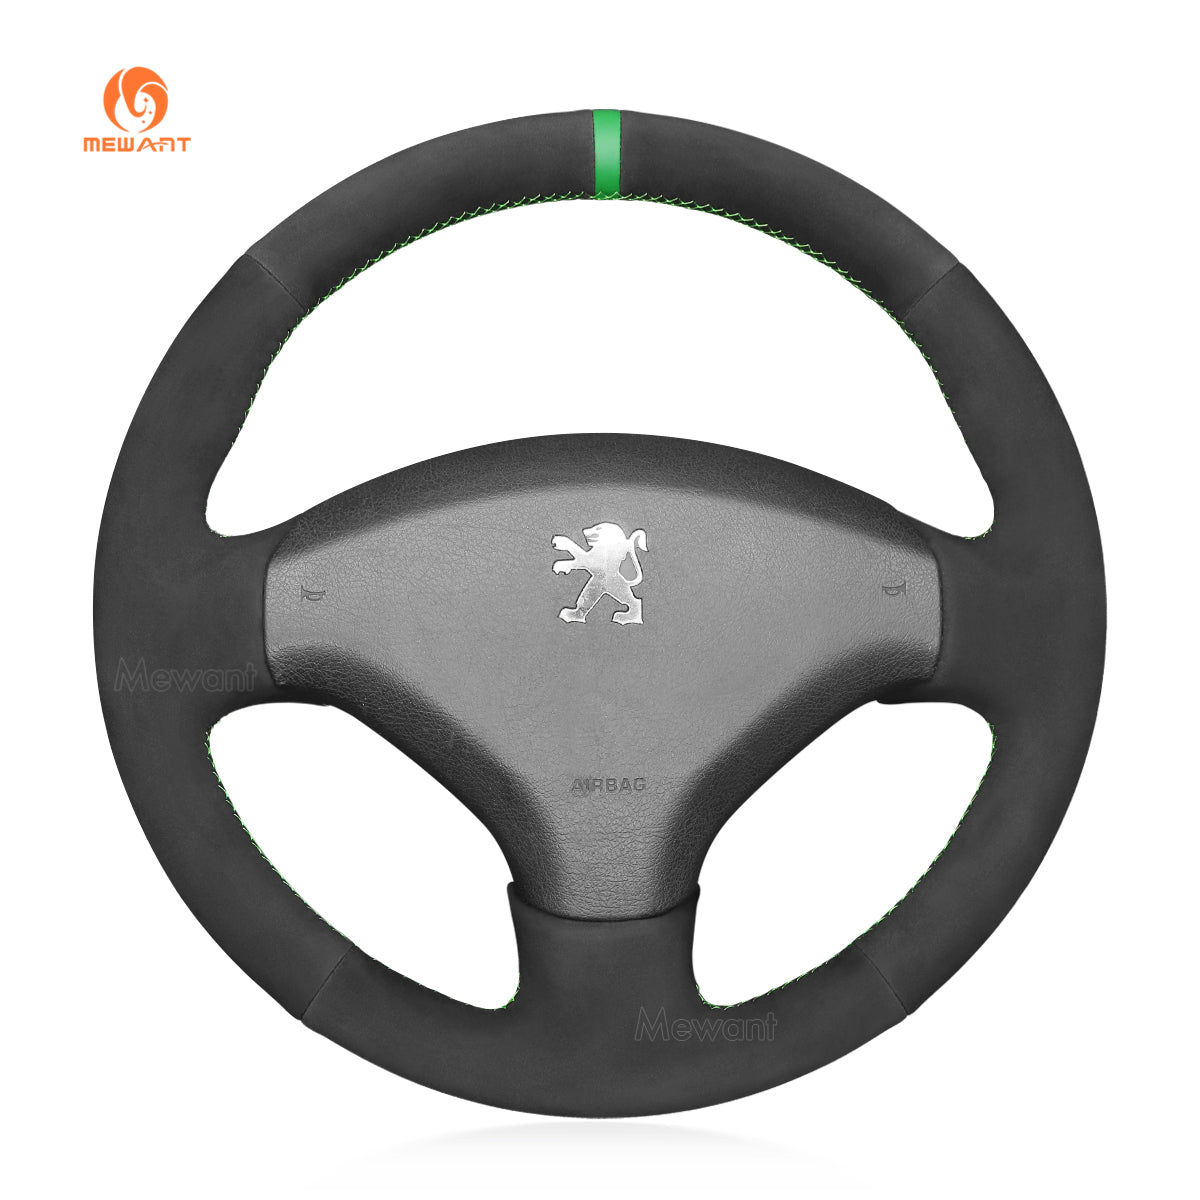 MEWANT Ｈand Stitch Black Suede Car Steering Wheel Cover for Peugeot 308 2007-2013(EU) / for Peugeot 408 2012-2014(RU)